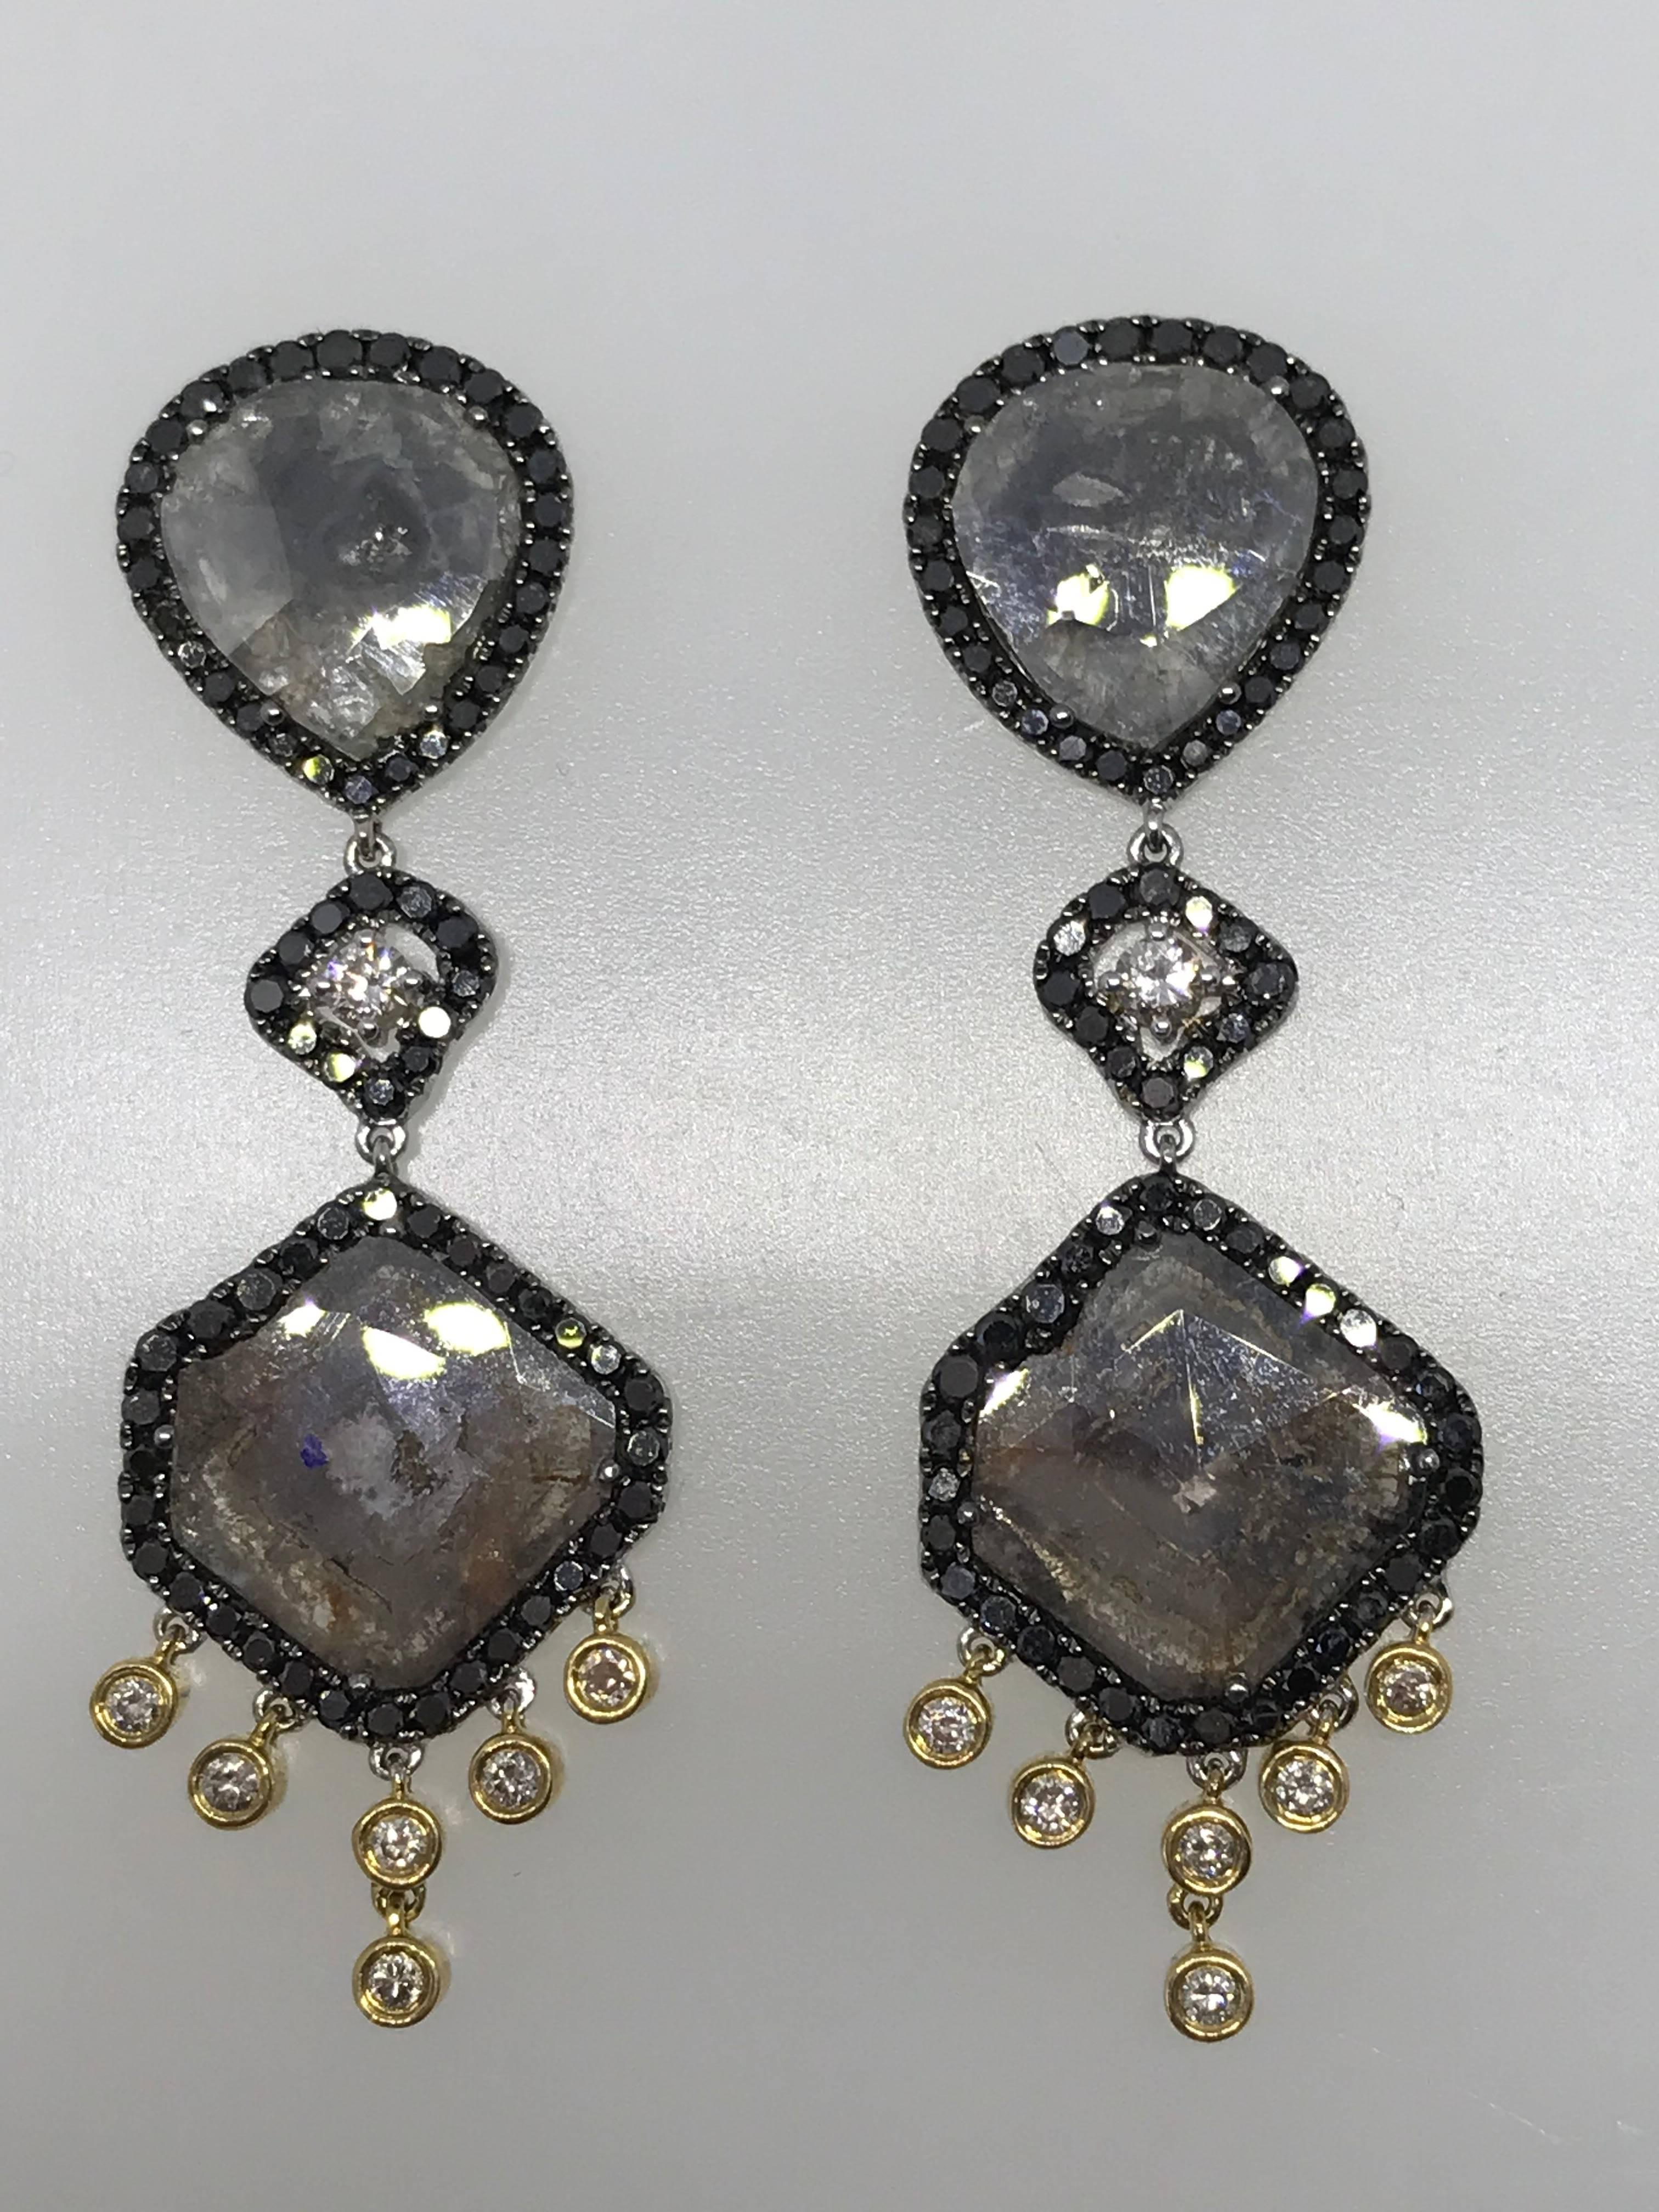 These Gorgeous earrings are studded with fancy flat diamonds and small black diamonds all around.
Details:
18k White and Yellow gold 7.65 grams tw.
4 Flat Diamonds 6.18 carats
2 Diamonds 0.12 carats, 12 Diamonds 0.19 carats
142 Black Diamonds 1.35